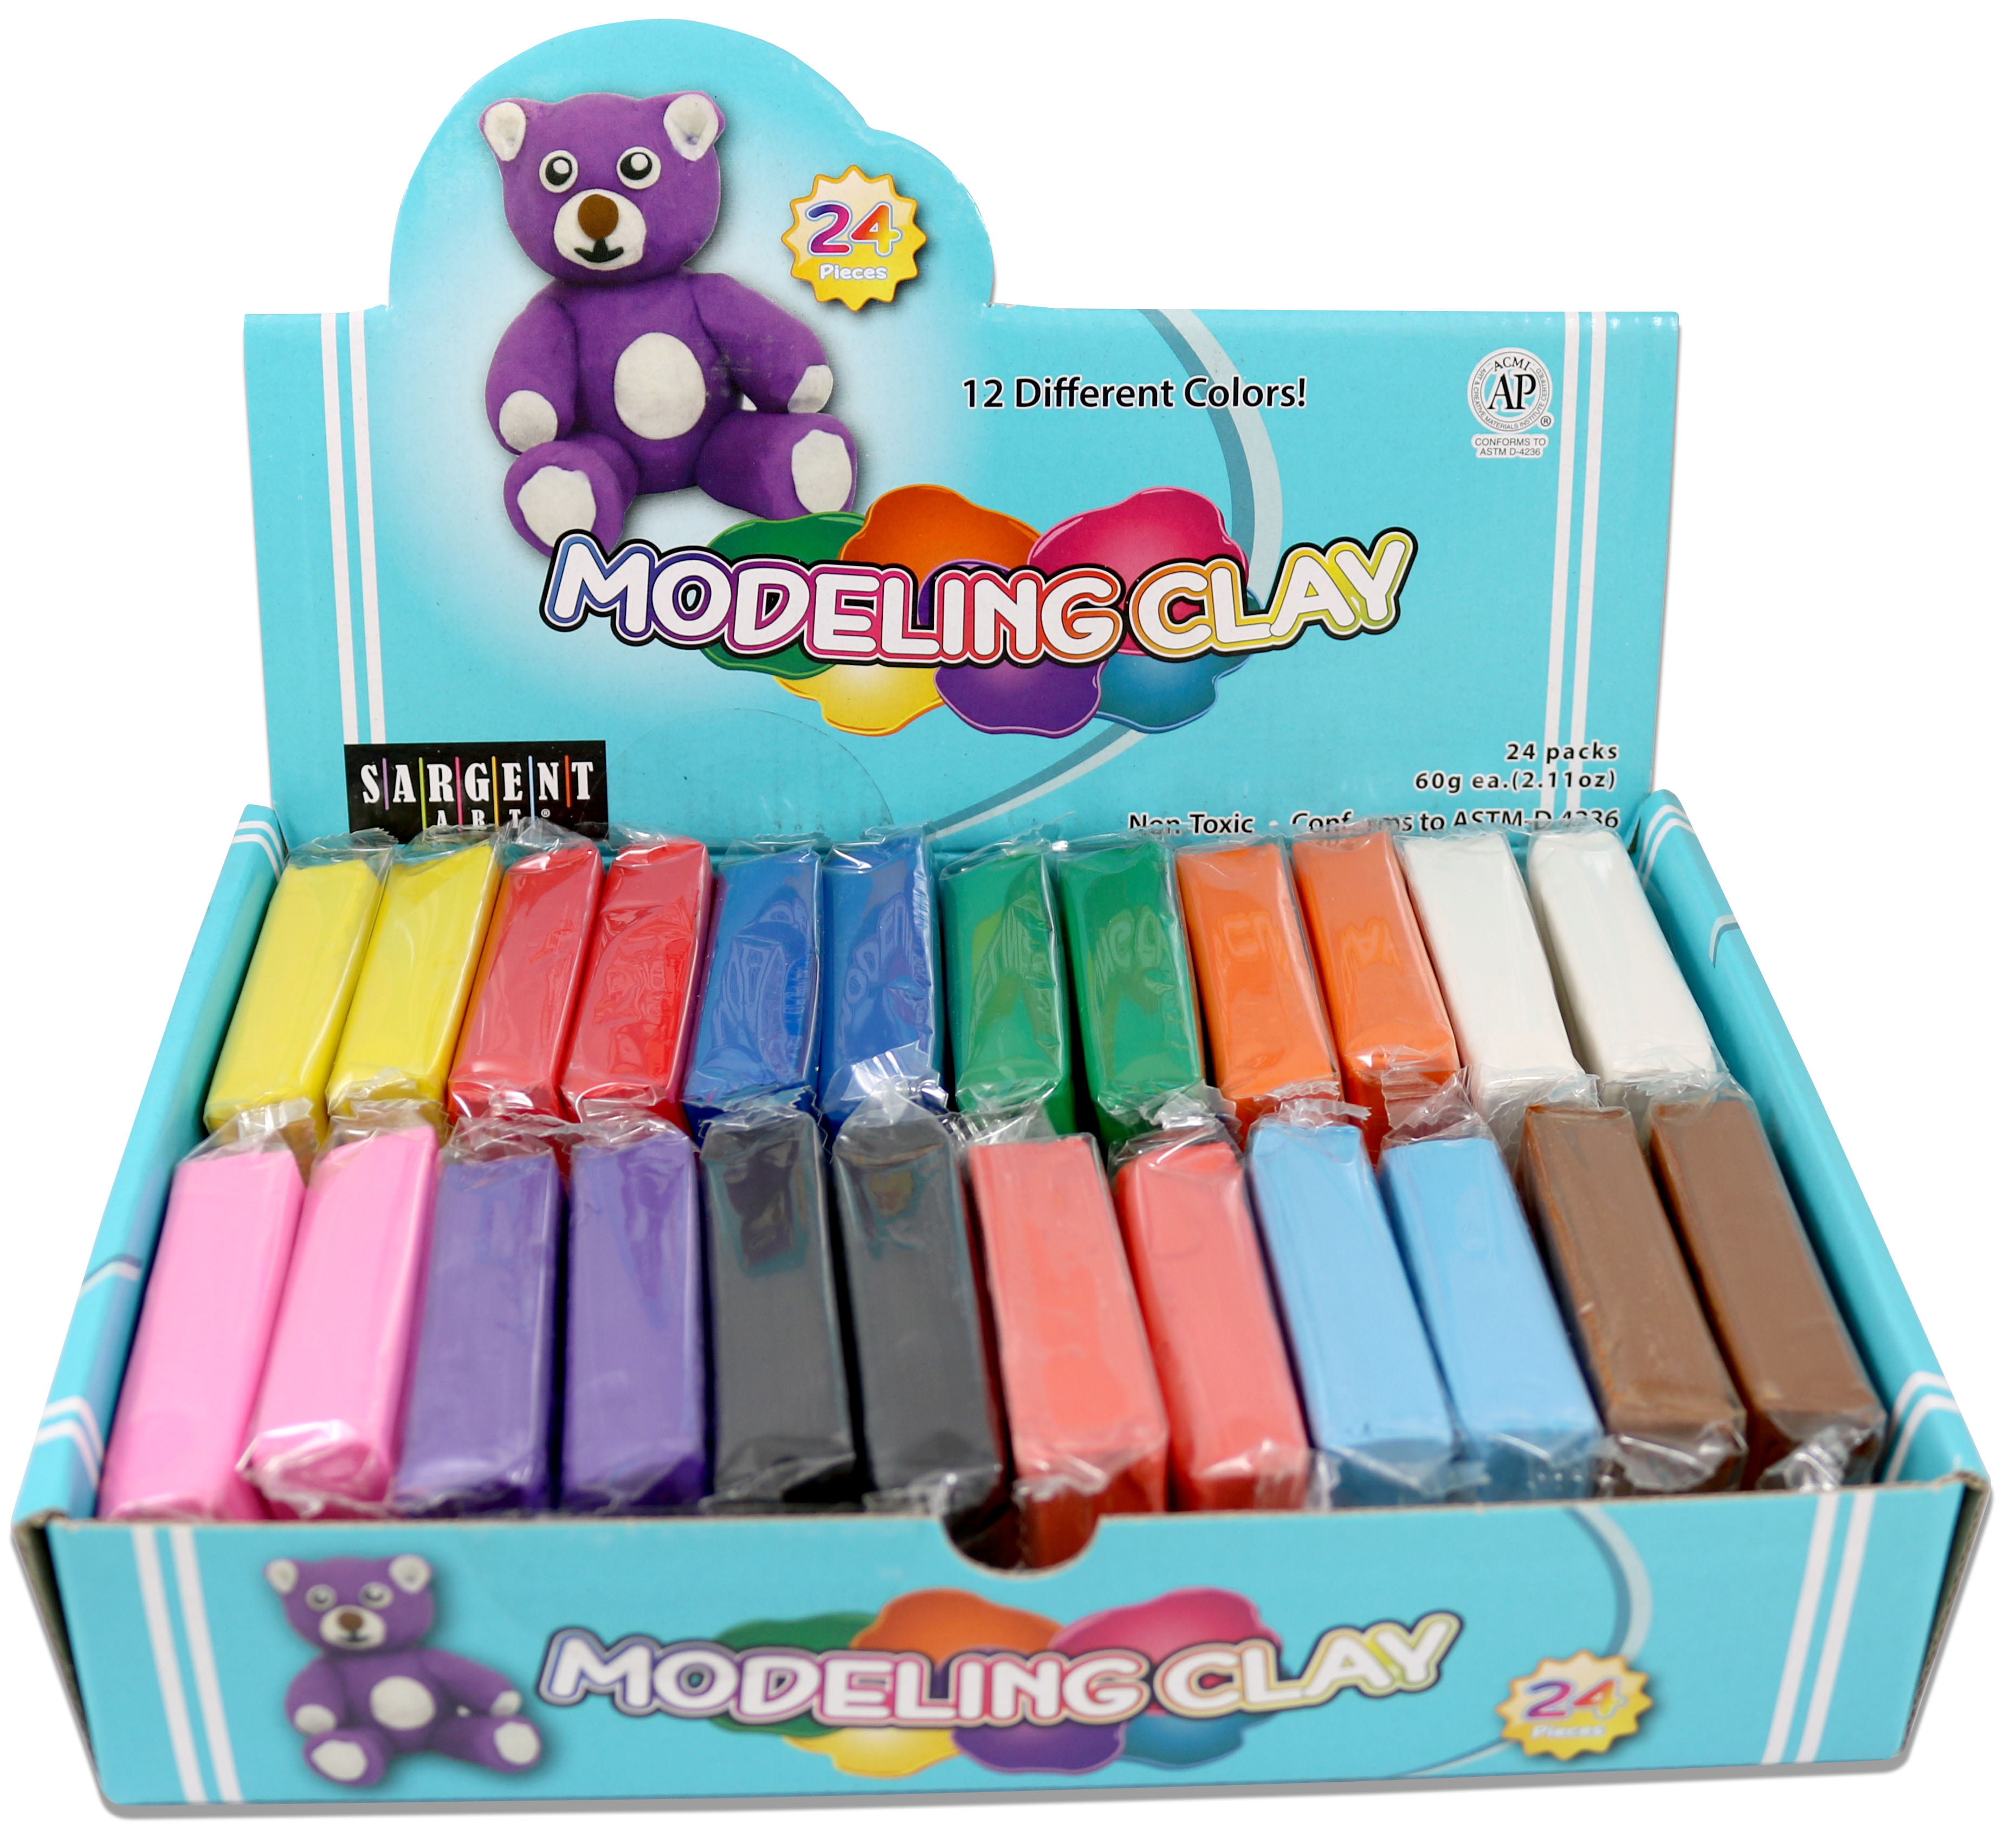 MODELING CLAY 12 STICKS MULTI COLORED 3" LONG STICKS IN 12 COLORS 